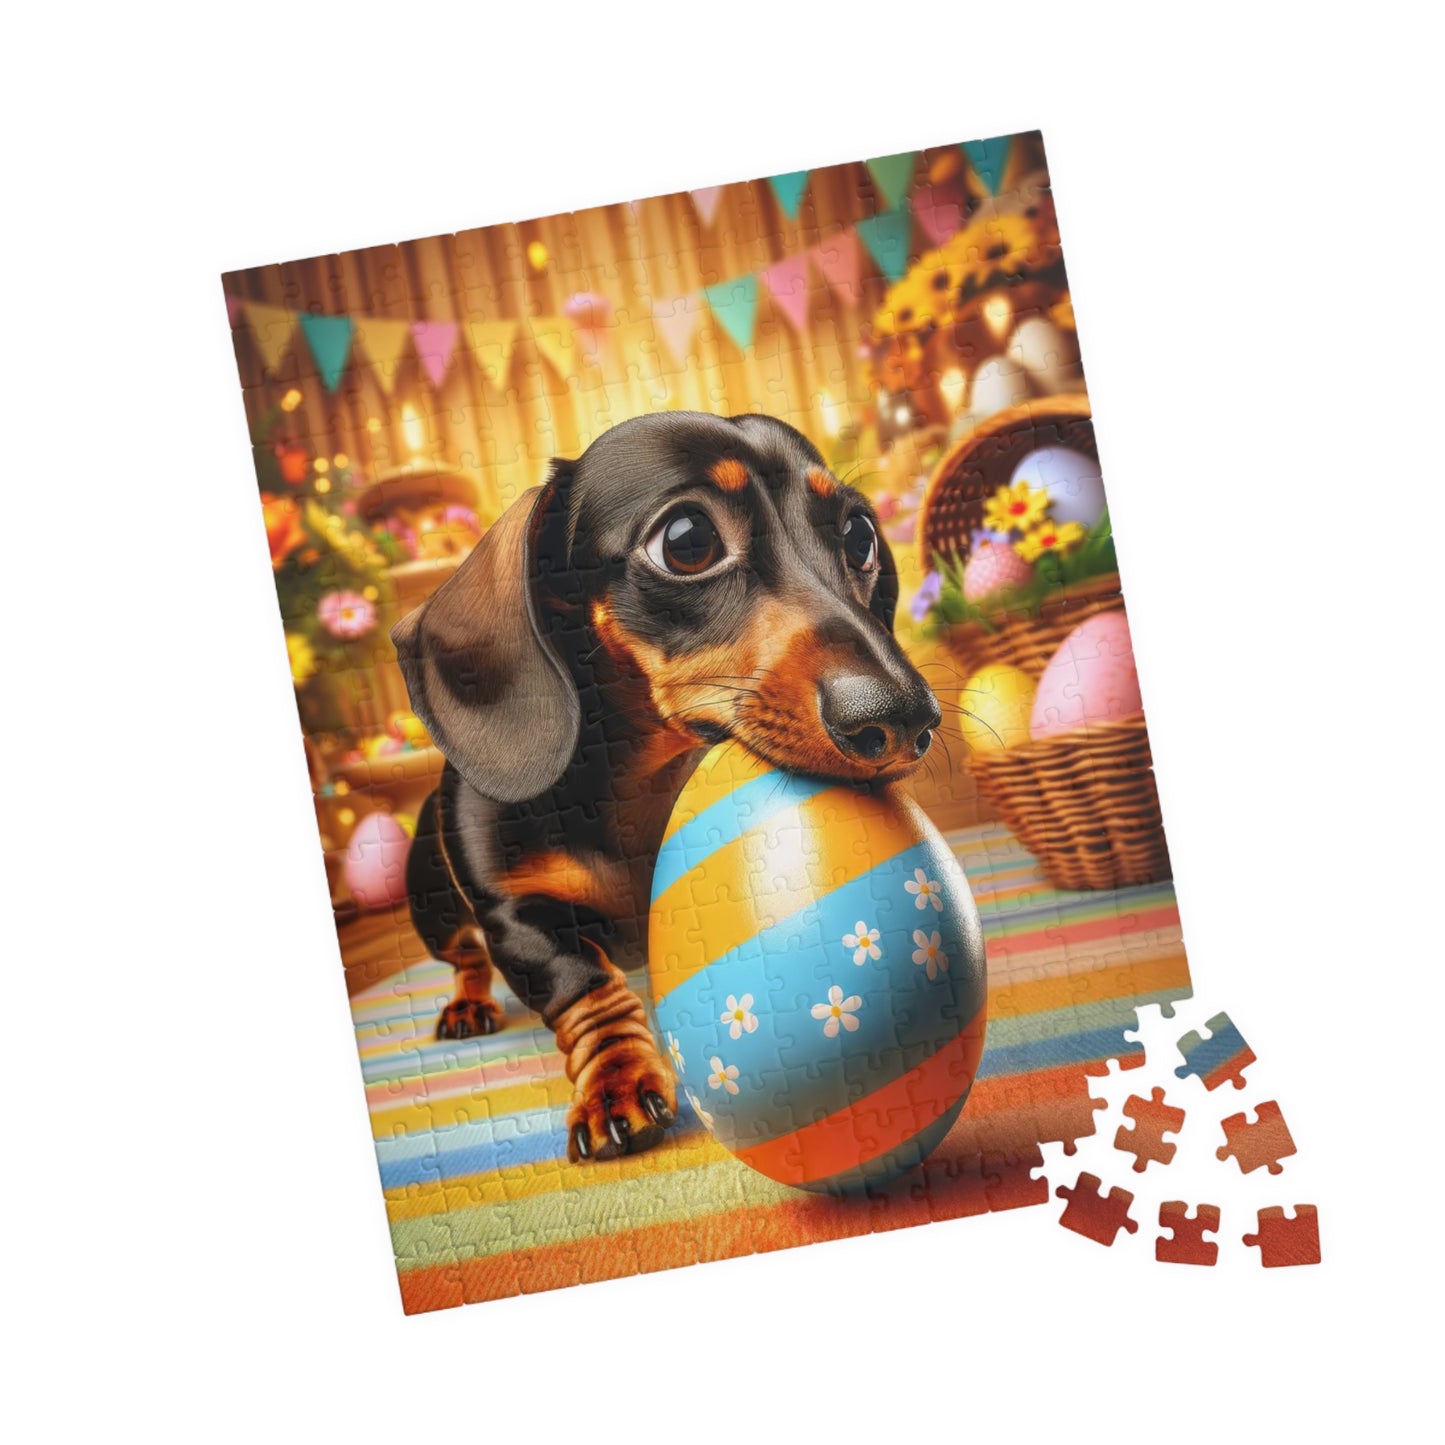 Egg-stra Special Dachshund Easter Puzzle - Mini Doxie Egg Challenge Jigsaw - Festive Family Gift, 110, 252, 520, 1014 Pieces